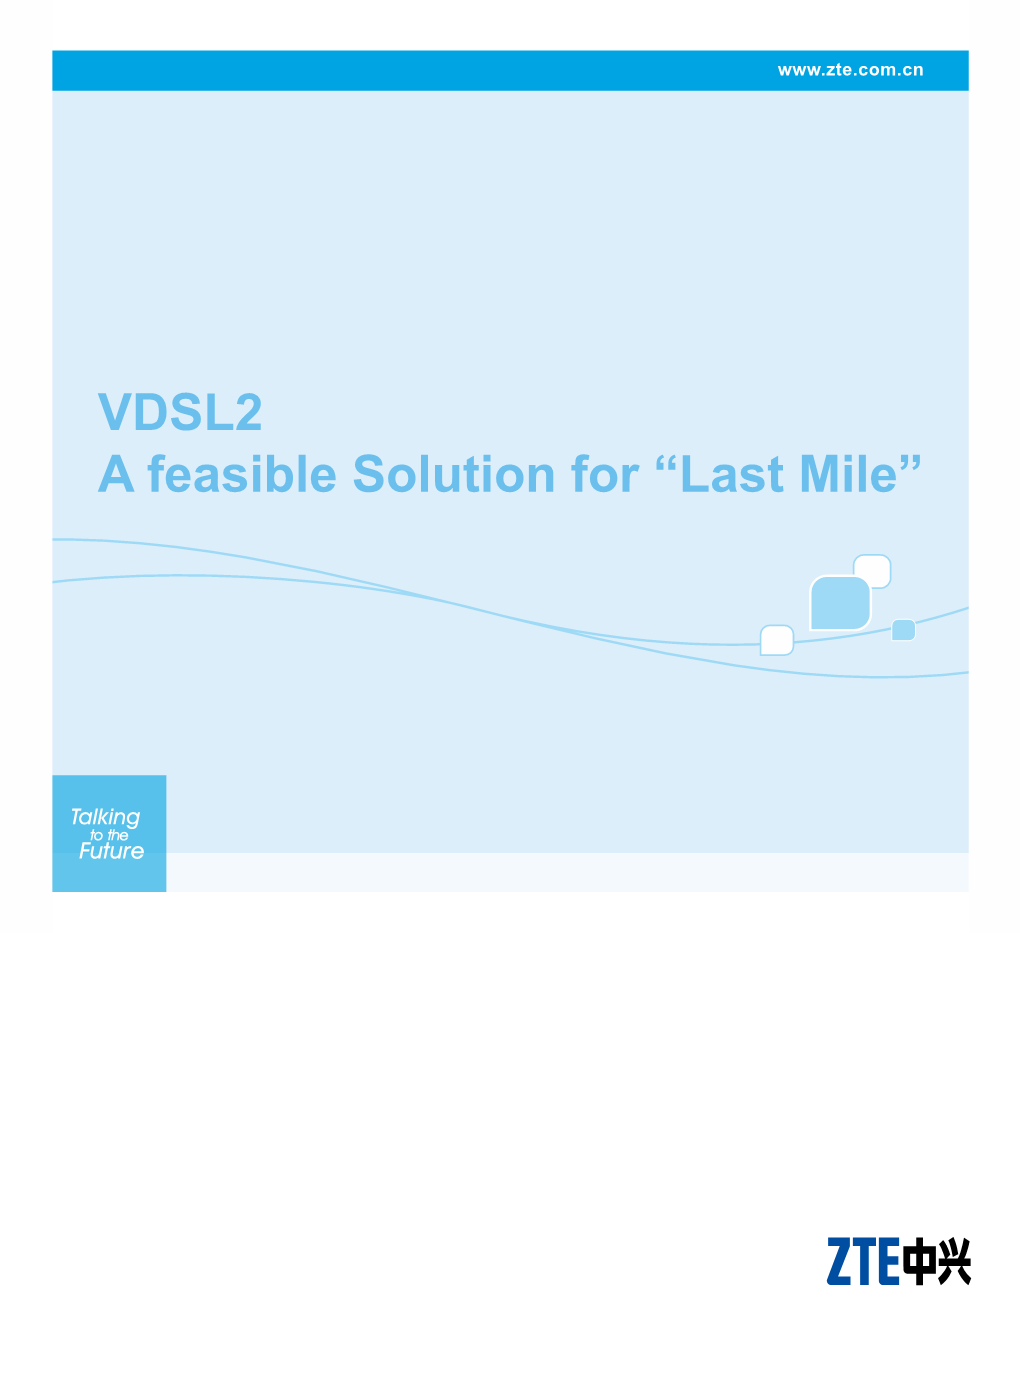 VDSL2 a Feasible Solution for “Last Mile” White Papers